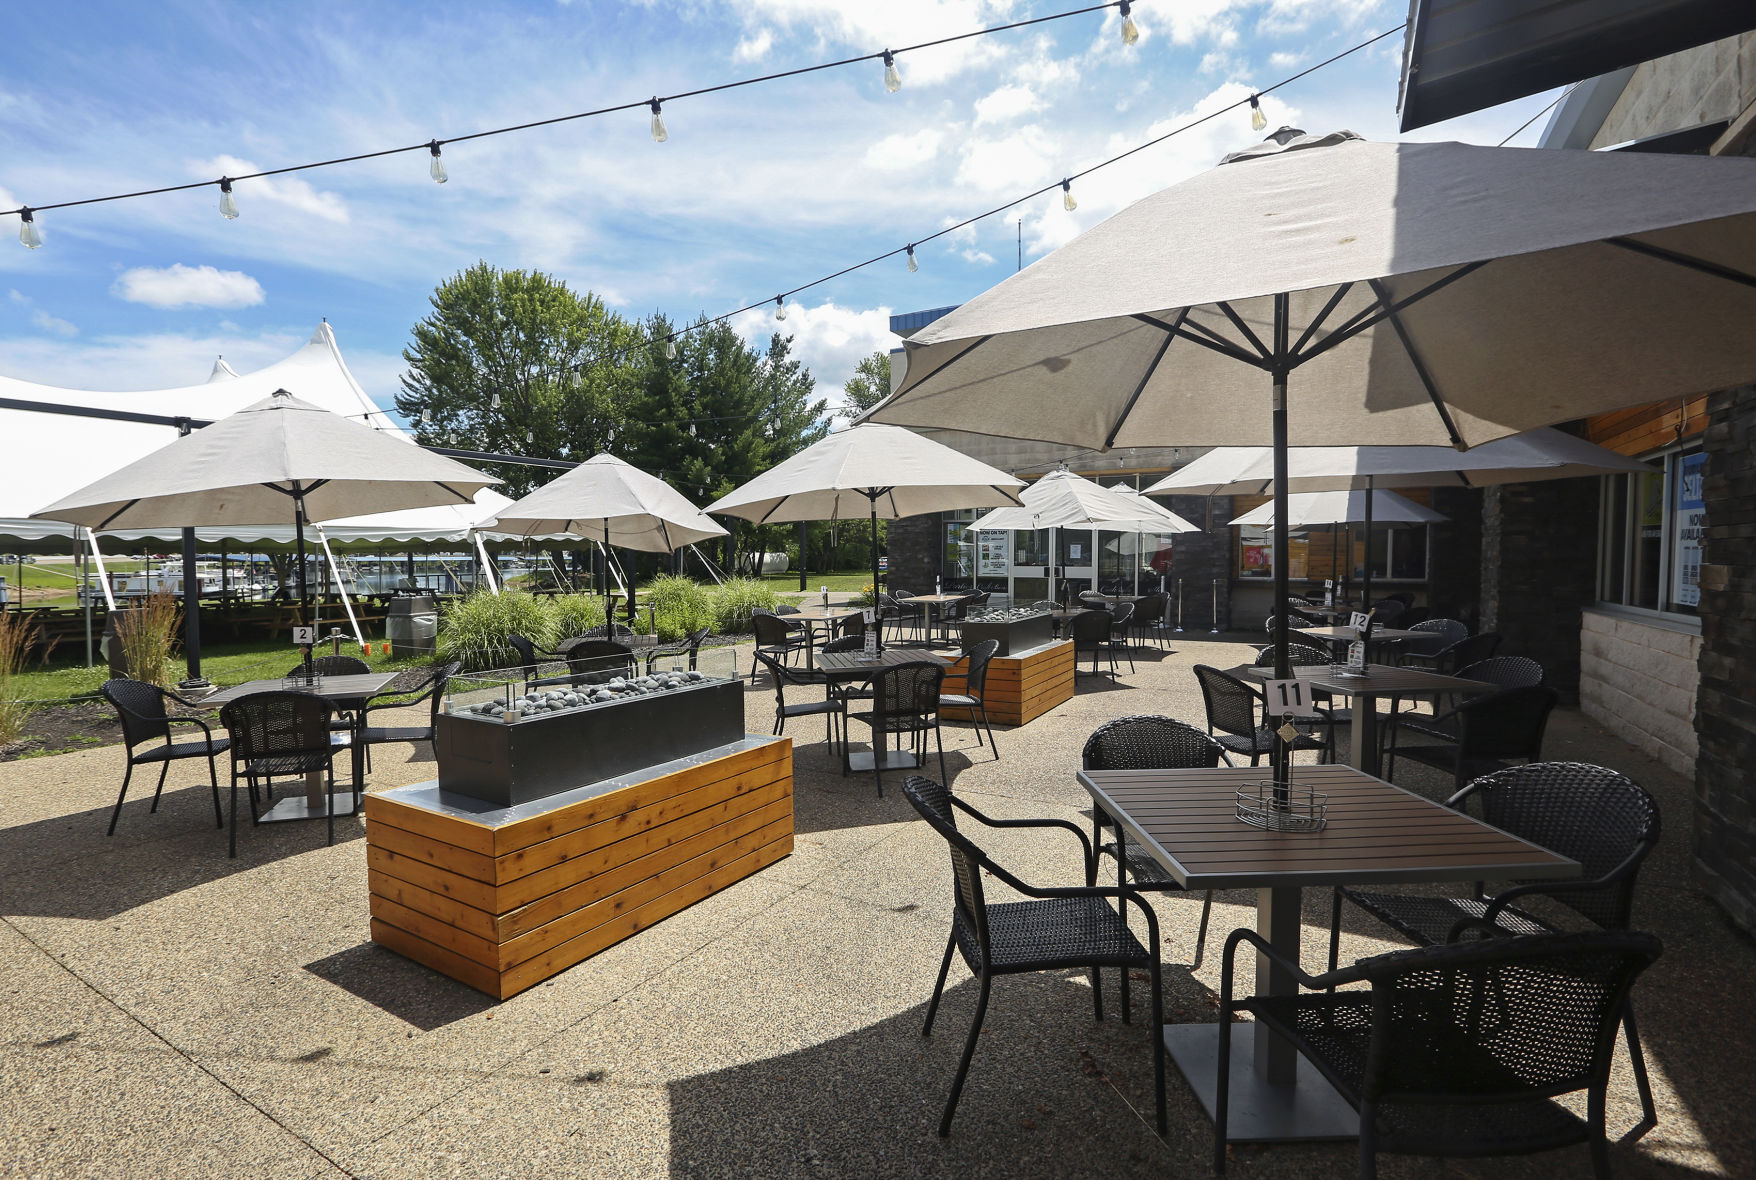 Outdoor seating at Frentress Lake Bar & Grill in East Dubuque, Ill., on Thursday, July 16, 2020. PHOTO CREDIT: NICKI KOHL